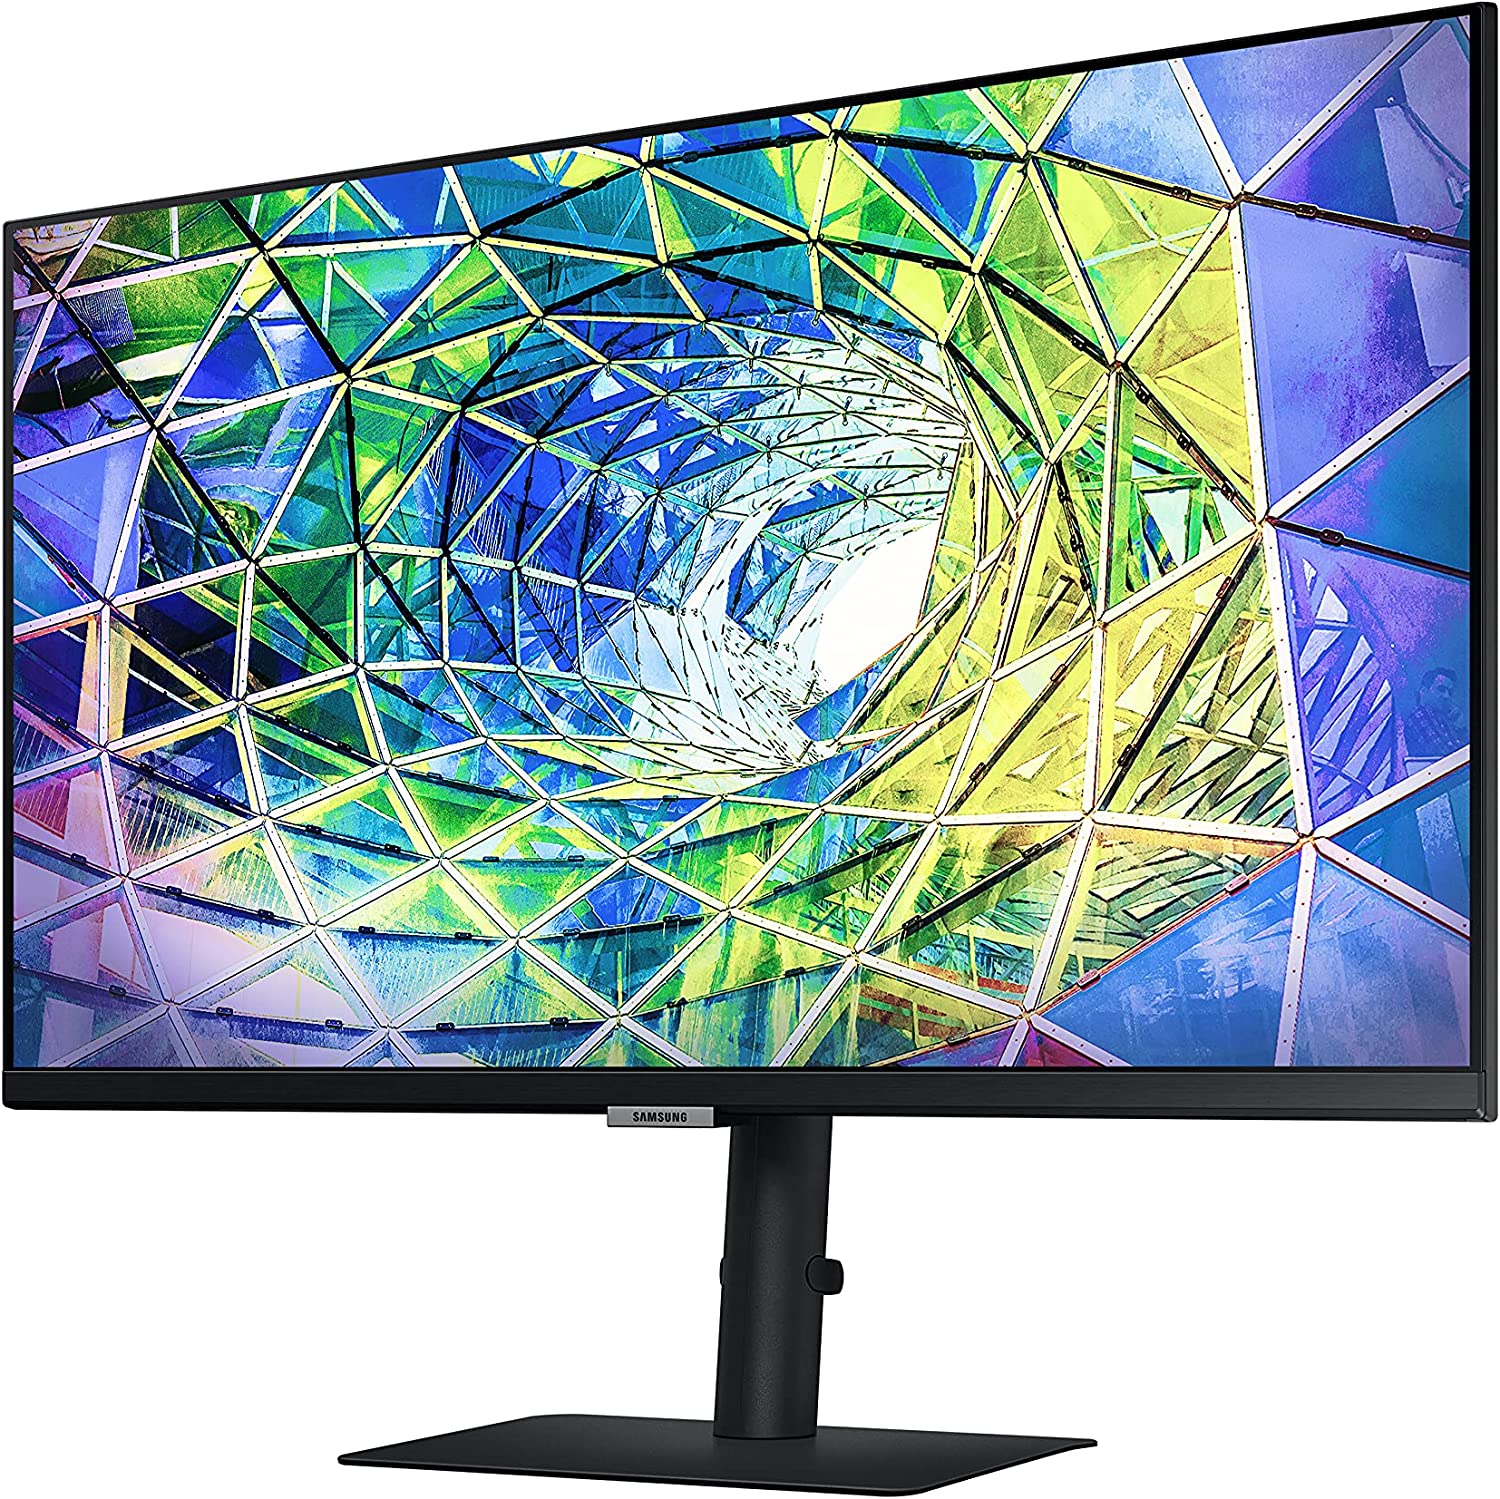 SAMSUNG S80A 27-Inch 4K UHD (3840x2160) Computer Monitor, HDMI, USB Hub with USB-C, HDR10 (1 Billion Colors), Built-in Speakers, Height Adjustable Stand